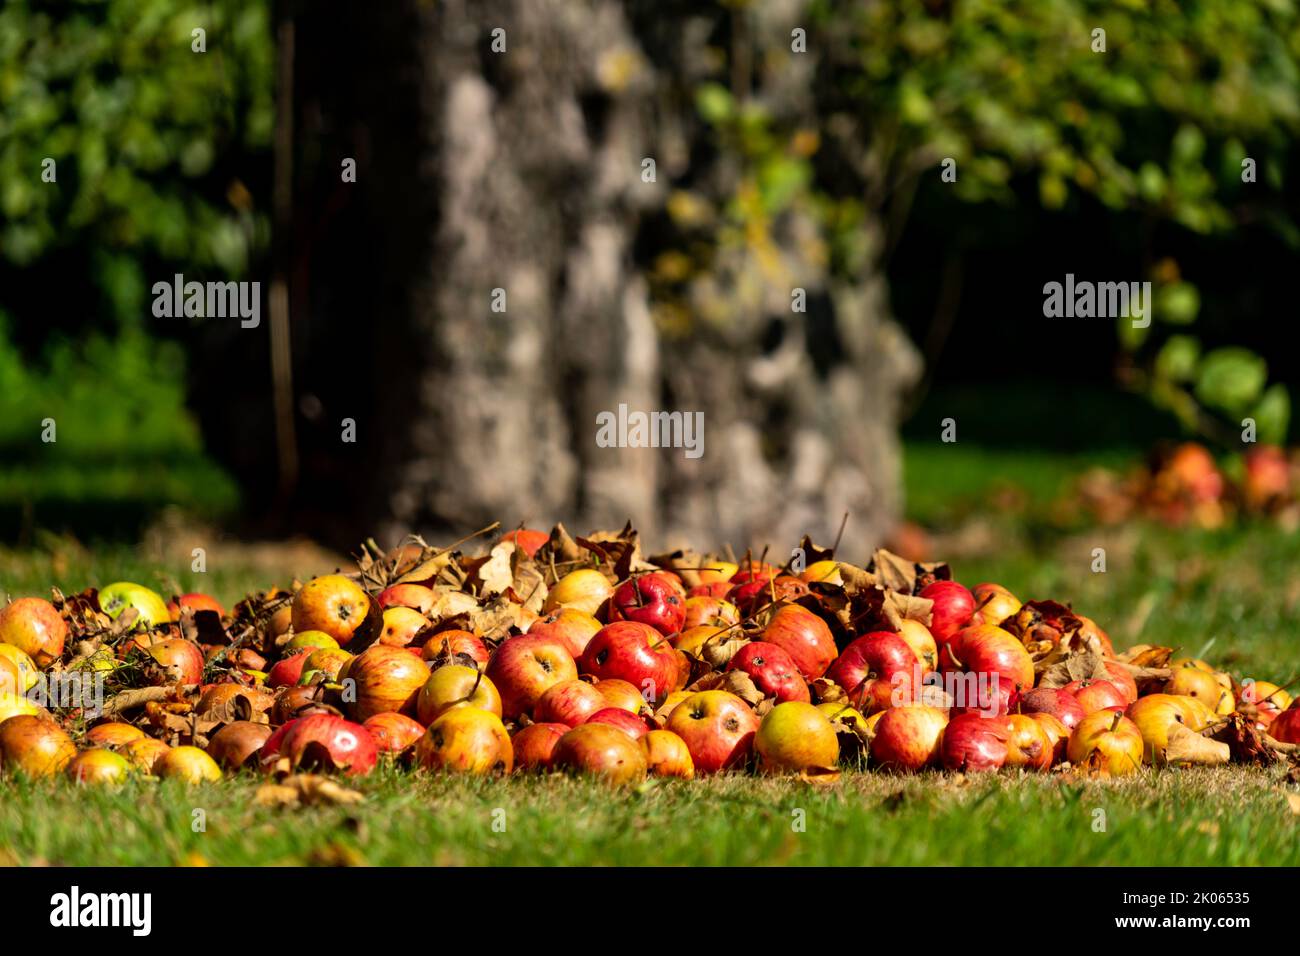 Piles of fallen apples on a lawn at the foot of an old apple tree Stock Photo